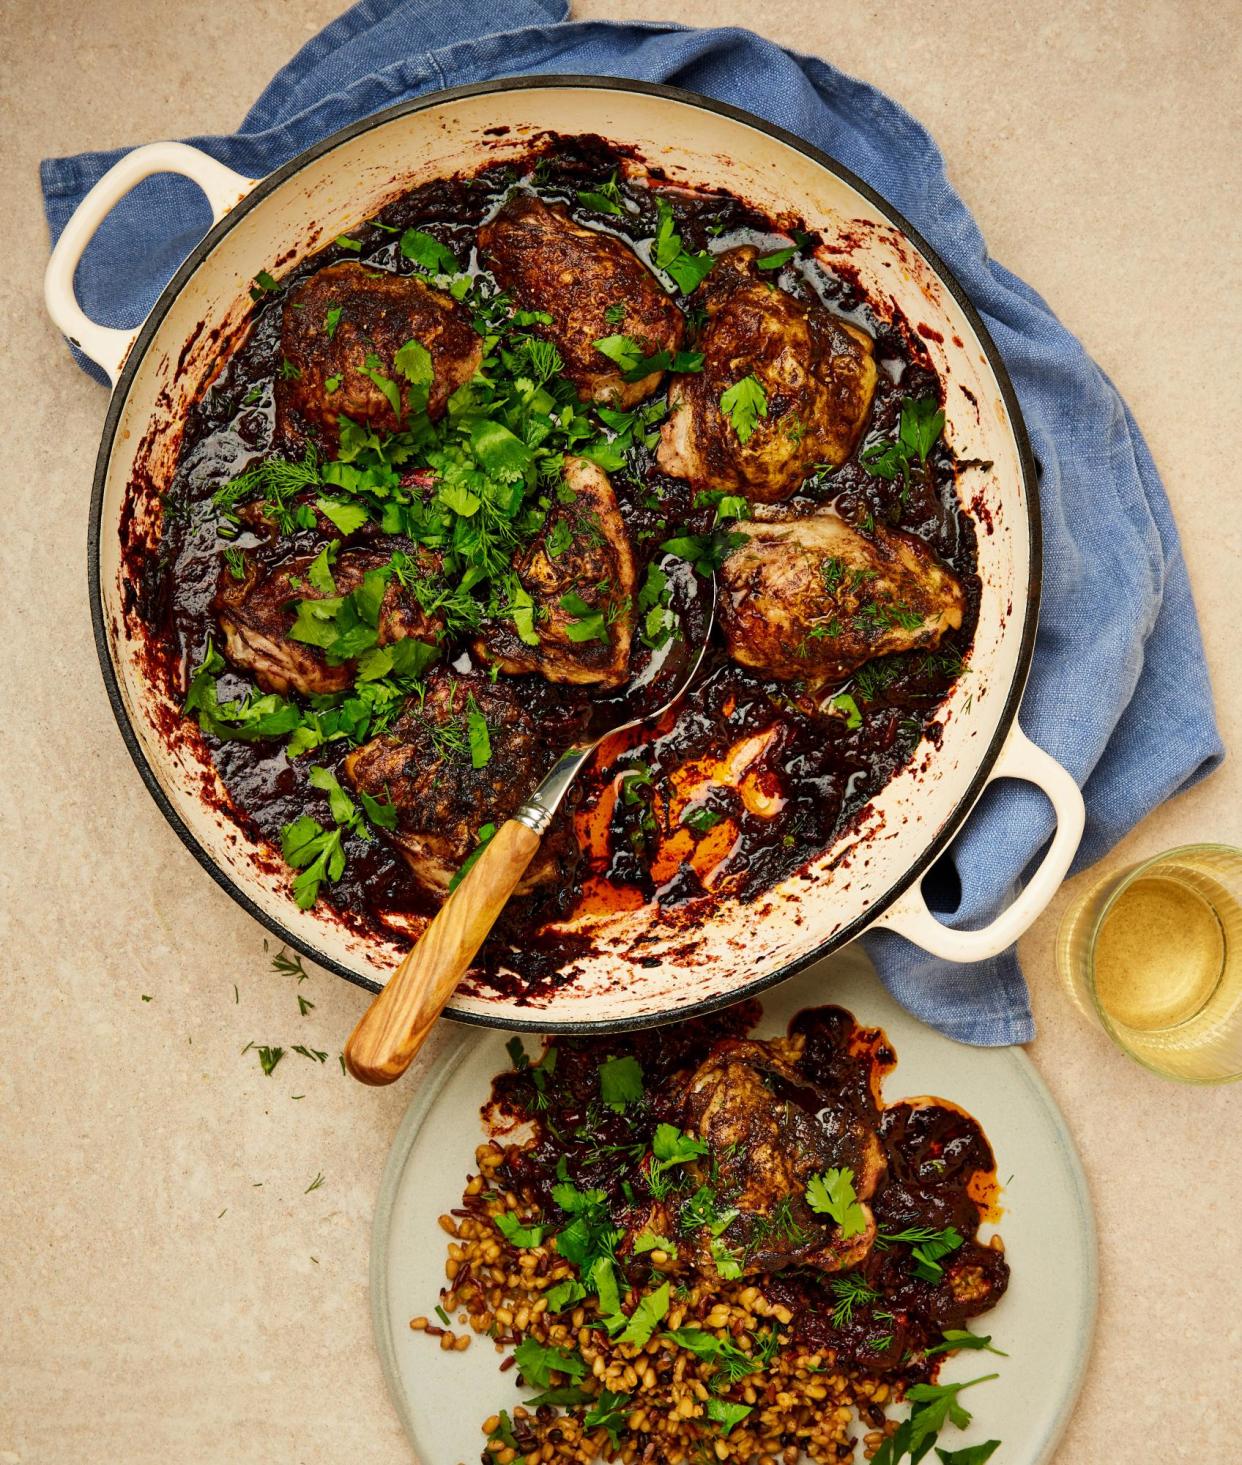 <span>Thomasina Miers’ roast chicken with charred tomato and hibiscus tinga.</span><span>Photograph: Louise Hagger/The Guardian. Food Styling: Emily Kydd. Prop styling: Jennifer Kay. Food styling assistant: Eden Owen-Jones. Photo assistant and retouching: Sophie Bronze.</span>